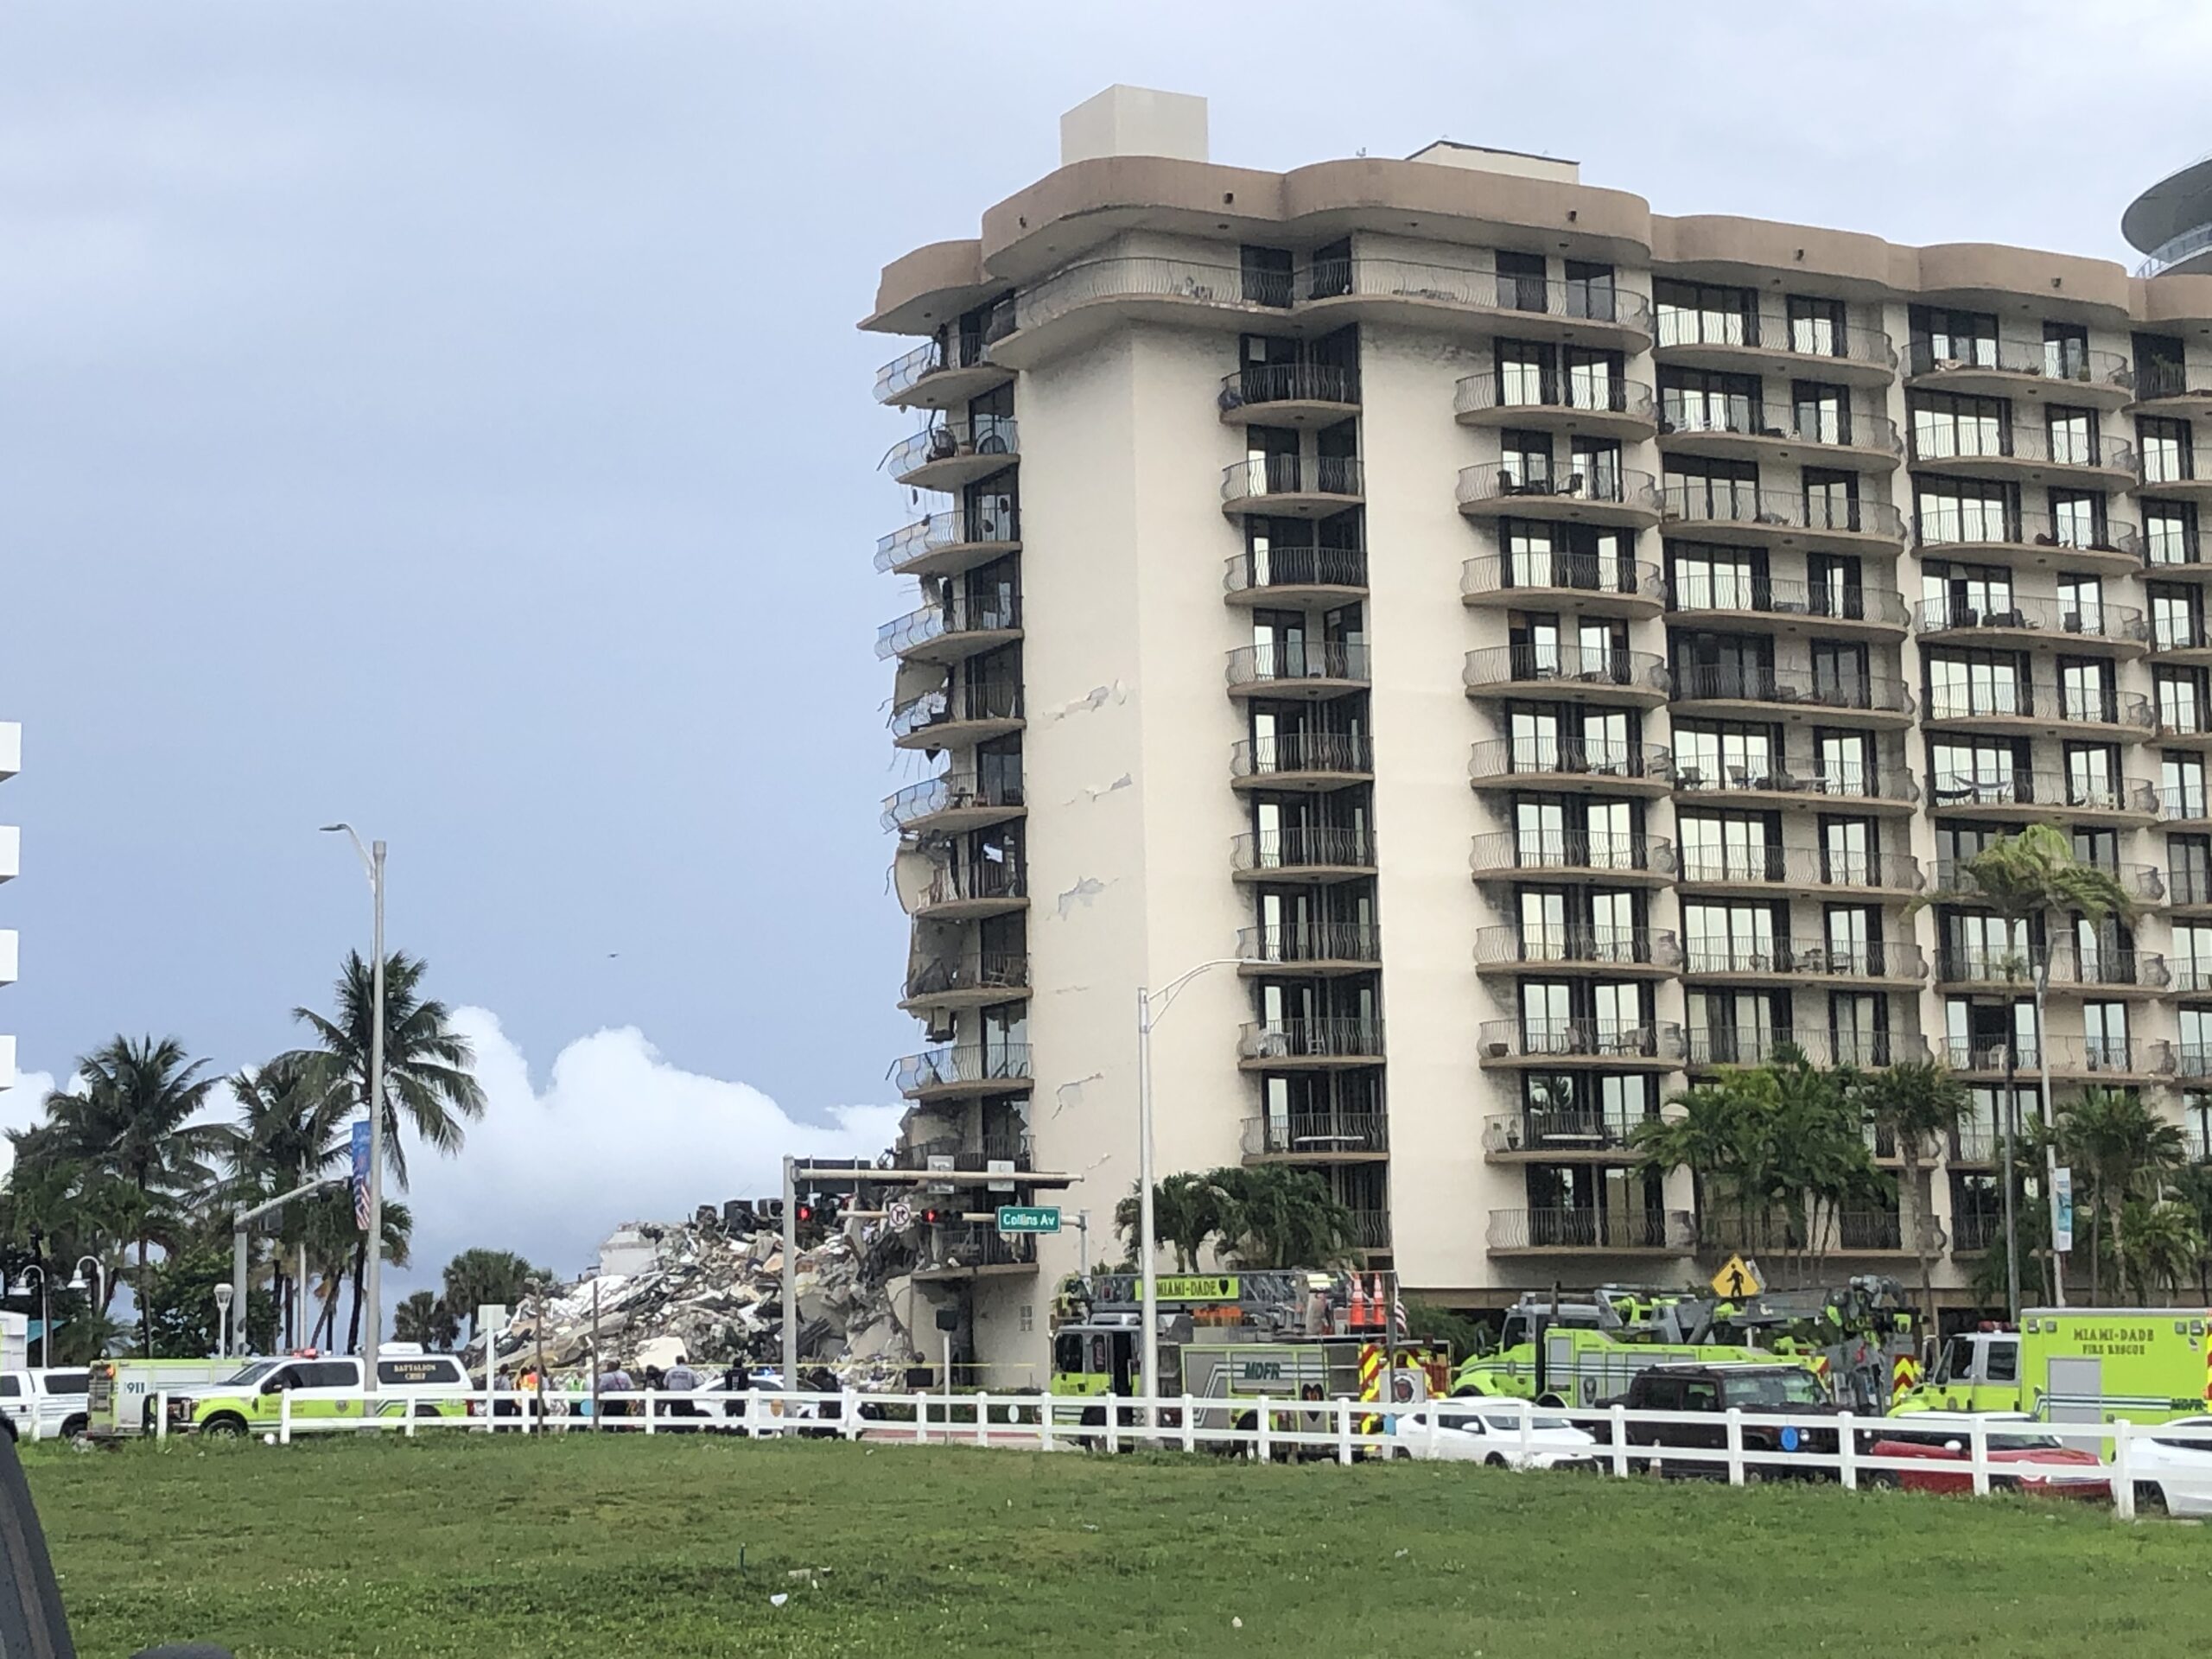 Building Inspections Proposed After Surfside Collapse